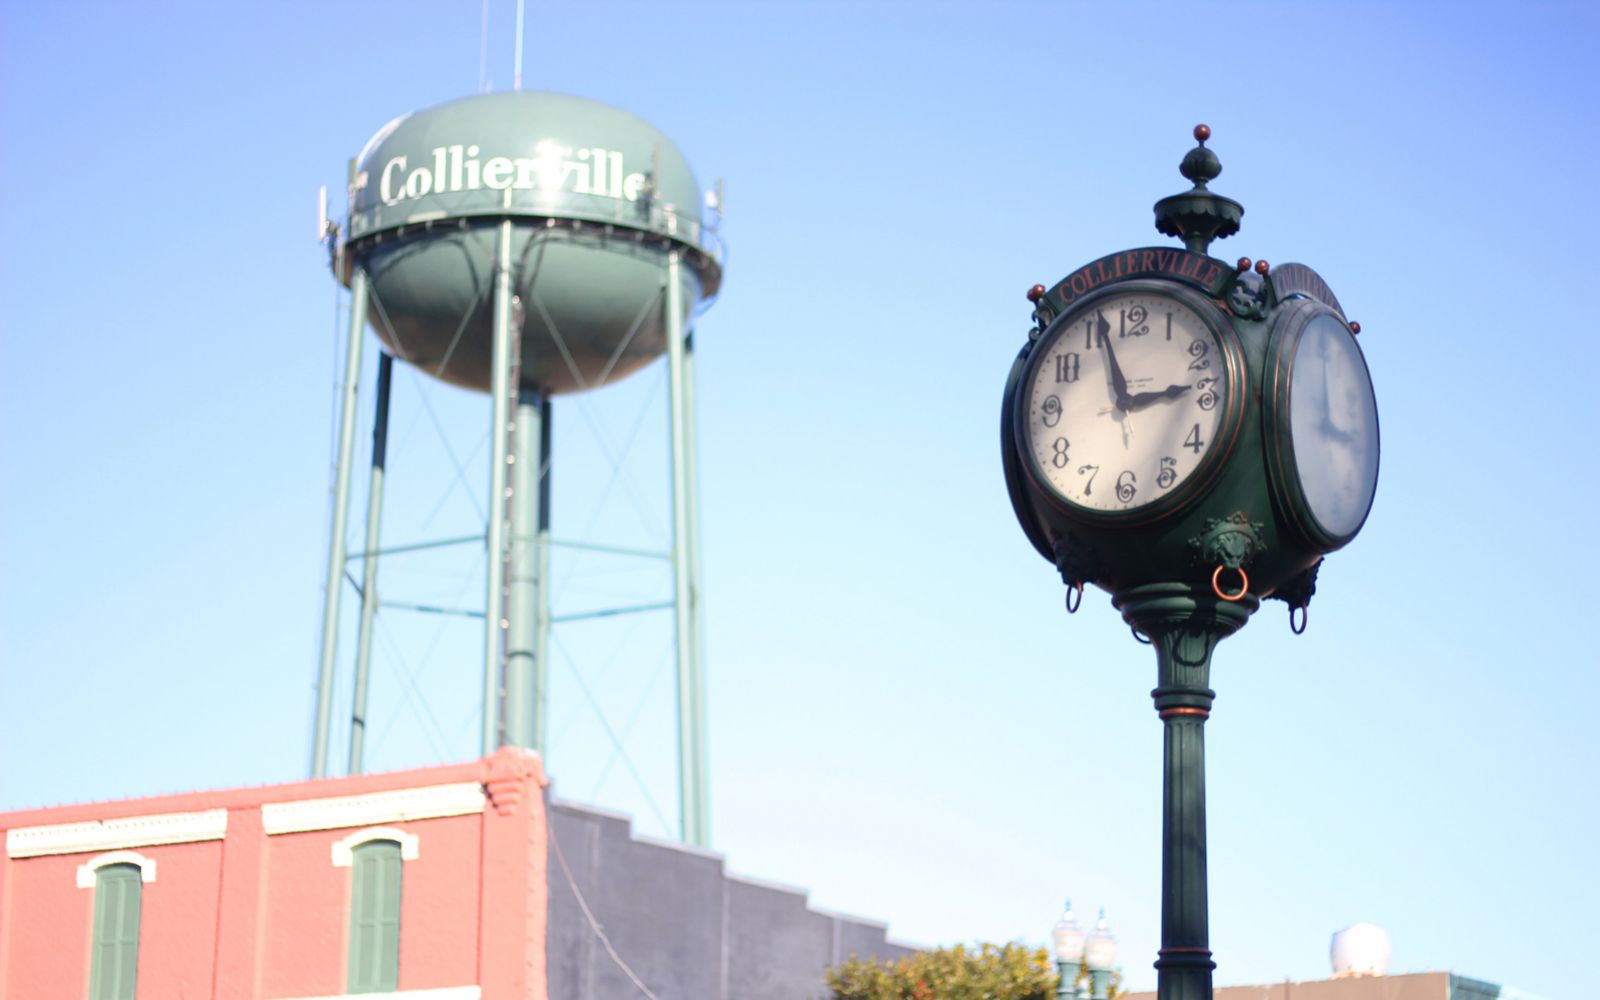 Green Collierville water tower with a clock on a pole in the foreground.